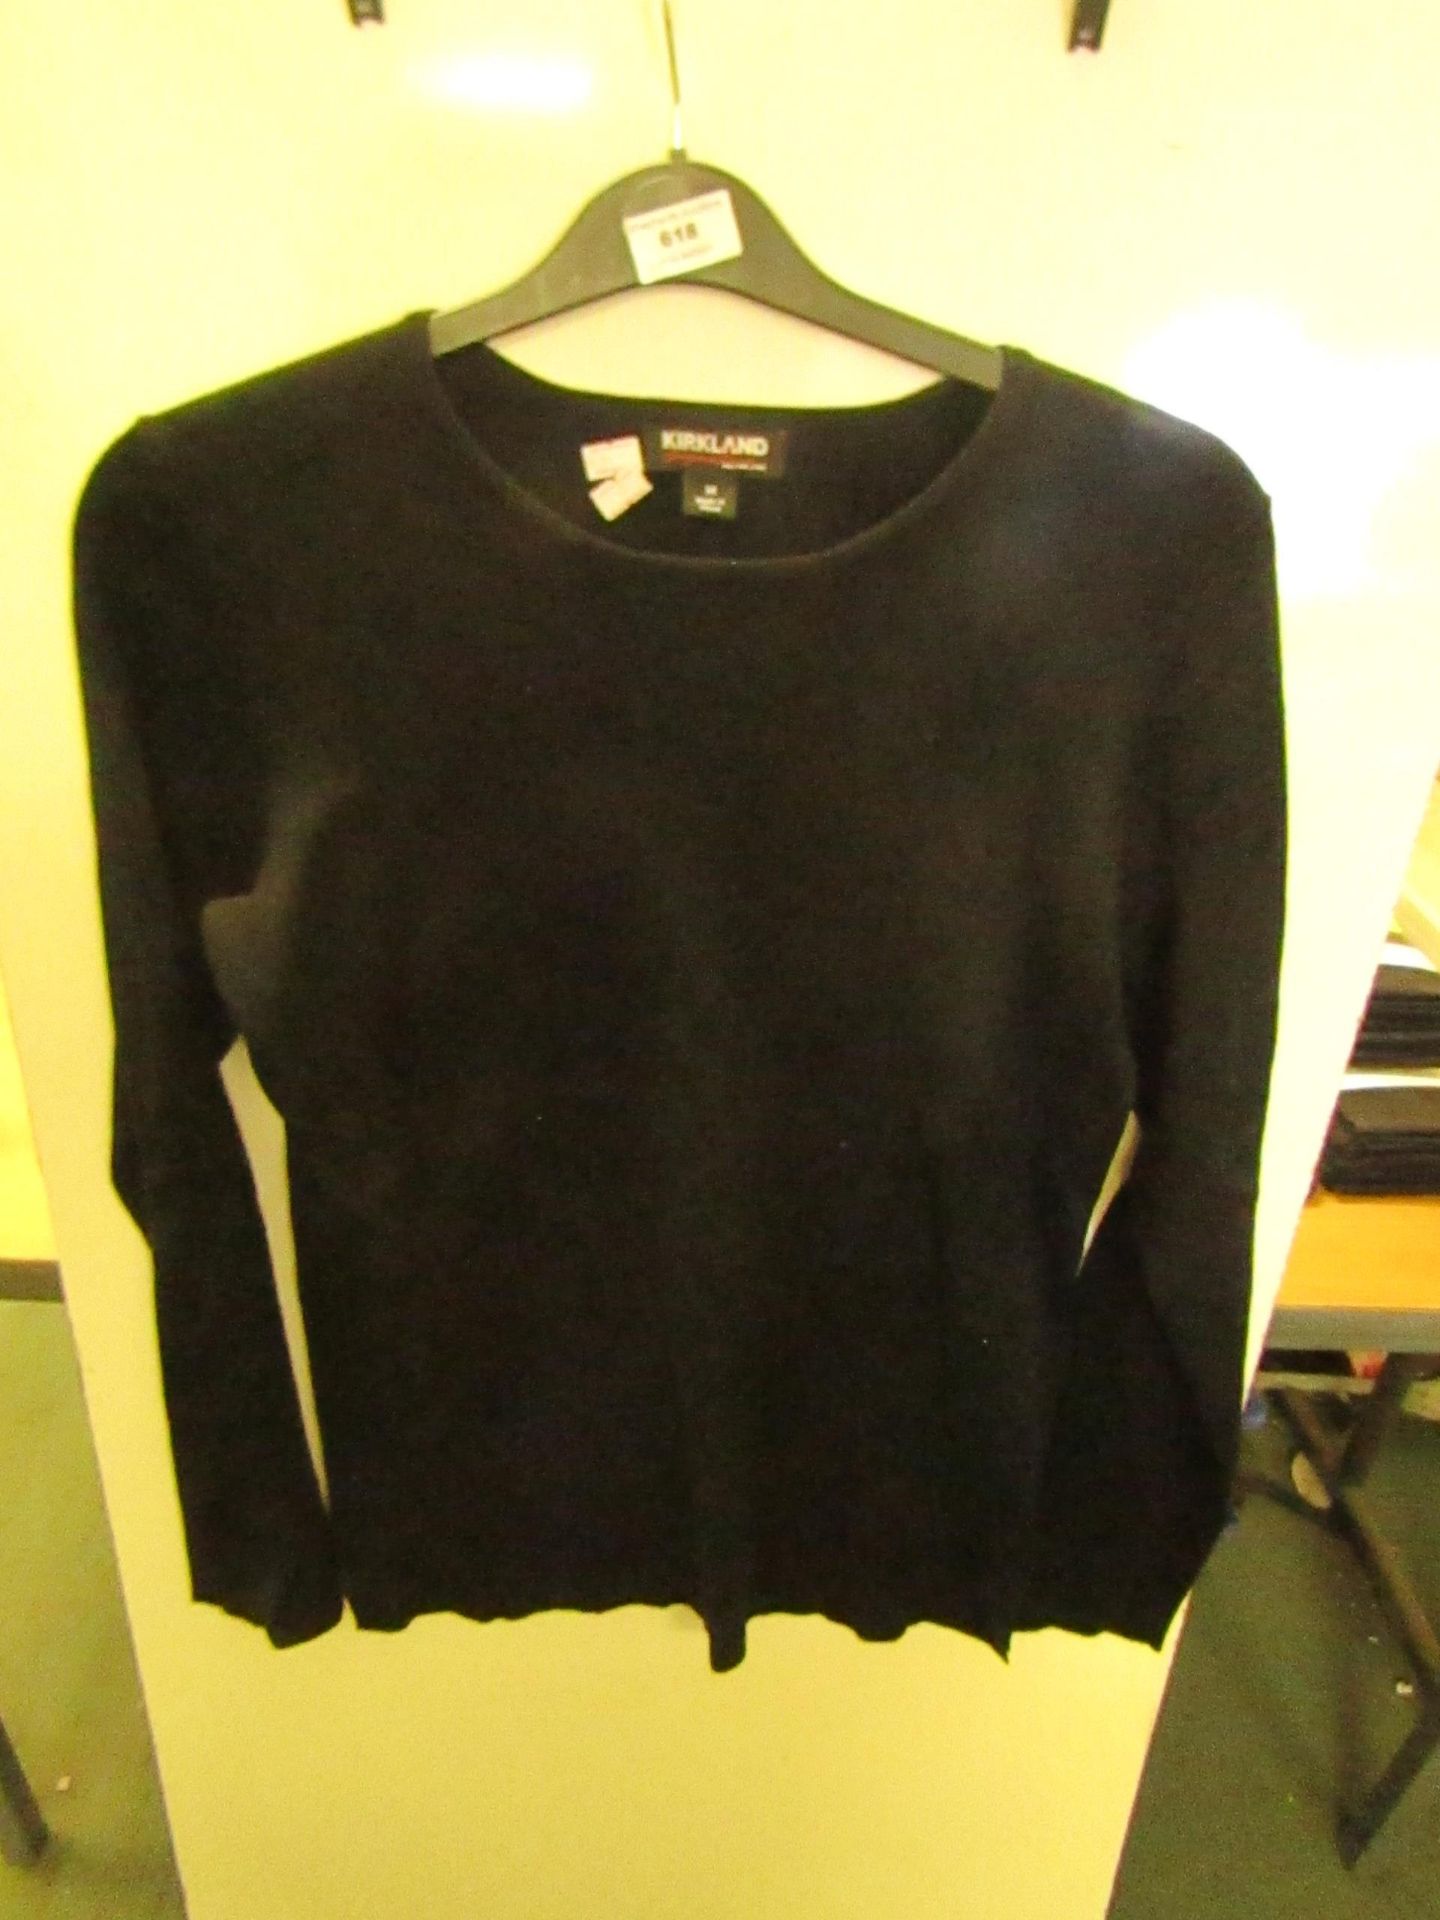 Kirkand Signature Ladies Crew Neck Sweater Black Size X/L New With Tags